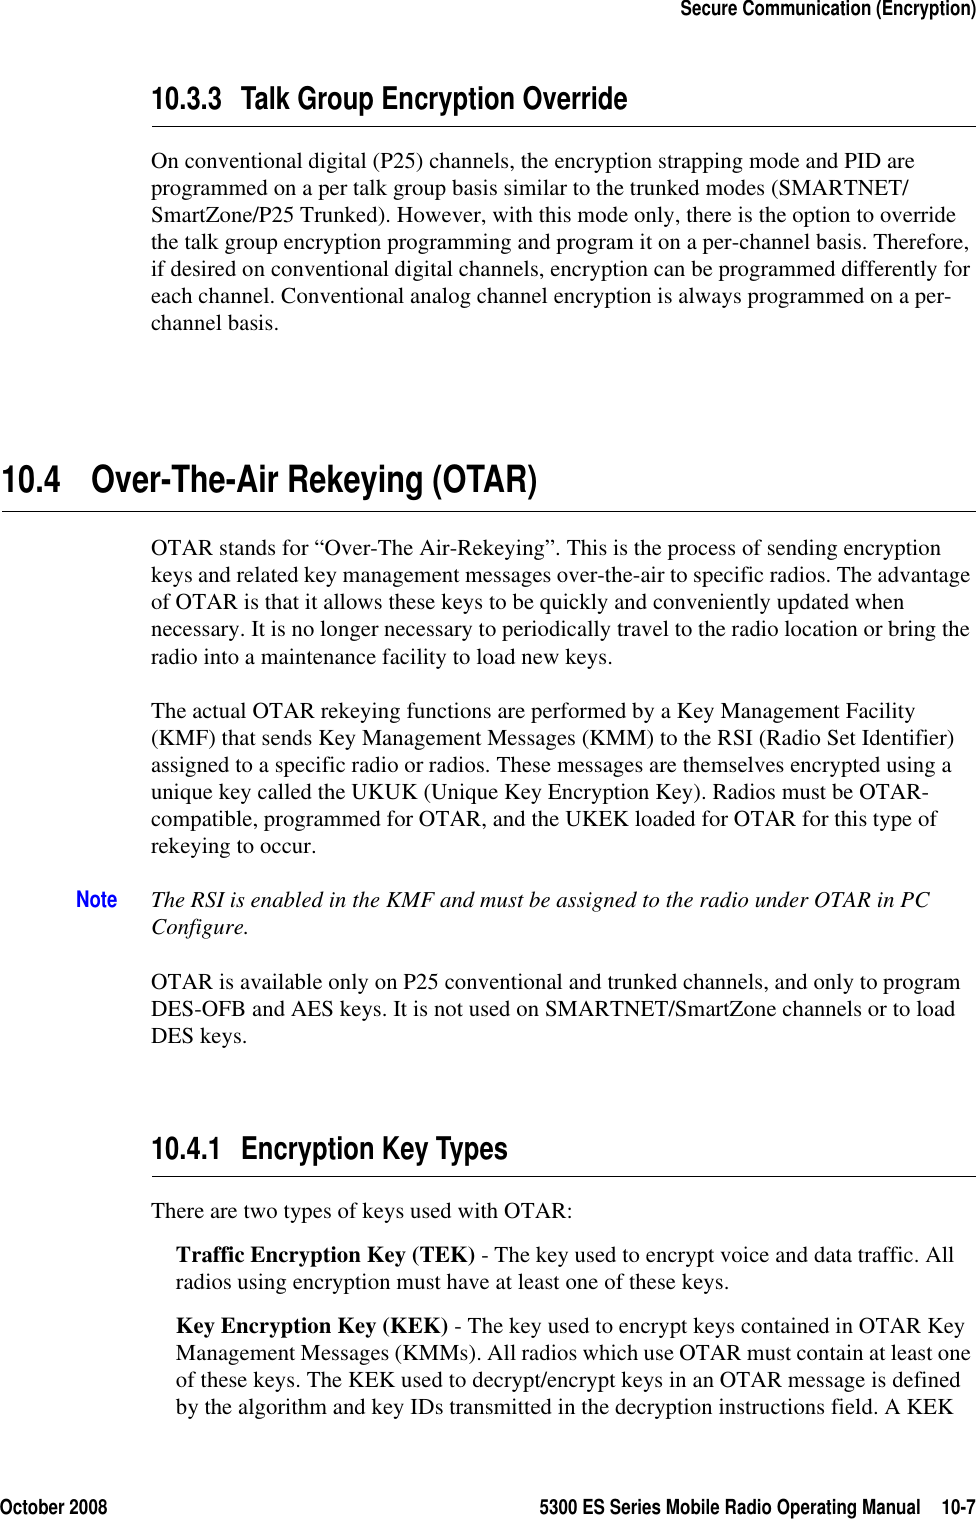 October 2008 5300 ES Series Mobile Radio Operating Manual 10-7Secure Communication (Encryption)10.3.3 Talk Group Encryption OverrideOn conventional digital (P25) channels, the encryption strapping mode and PID are programmed on a per talk group basis similar to the trunked modes (SMARTNET/SmartZone/P25 Trunked). However, with this mode only, there is the option to override the talk group encryption programming and program it on a per-channel basis. Therefore, if desired on conventional digital channels, encryption can be programmed differently for each channel. Conventional analog channel encryption is always programmed on a per-channel basis.10.4 Over-The-Air Rekeying (OTAR)OTAR stands for “Over-The Air-Rekeying”. This is the process of sending encryption keys and related key management messages over-the-air to specific radios. The advantage of OTAR is that it allows these keys to be quickly and conveniently updated when necessary. It is no longer necessary to periodically travel to the radio location or bring the radio into a maintenance facility to load new keys.The actual OTAR rekeying functions are performed by a Key Management Facility (KMF) that sends Key Management Messages (KMM) to the RSI (Radio Set Identifier) assigned to a specific radio or radios. These messages are themselves encrypted using a unique key called the UKUK (Unique Key Encryption Key). Radios must be OTAR-compatible, programmed for OTAR, and the UKEK loaded for OTAR for this type of rekeying to occur.Note The RSI is enabled in the KMF and must be assigned to the radio under OTAR in PC Configure.OTAR is available only on P25 conventional and trunked channels, and only to program DES-OFB and AES keys. It is not used on SMARTNET/SmartZone channels or to load DES keys.10.4.1 Encryption Key TypesThere are two types of keys used with OTAR:Traffic Encryption Key (TEK) - The key used to encrypt voice and data traffic. All radios using encryption must have at least one of these keys.Key Encryption Key (KEK) - The key used to encrypt keys contained in OTAR Key Management Messages (KMMs). All radios which use OTAR must contain at least one of these keys. The KEK used to decrypt/encrypt keys in an OTAR message is defined by the algorithm and key IDs transmitted in the decryption instructions field. A KEK 